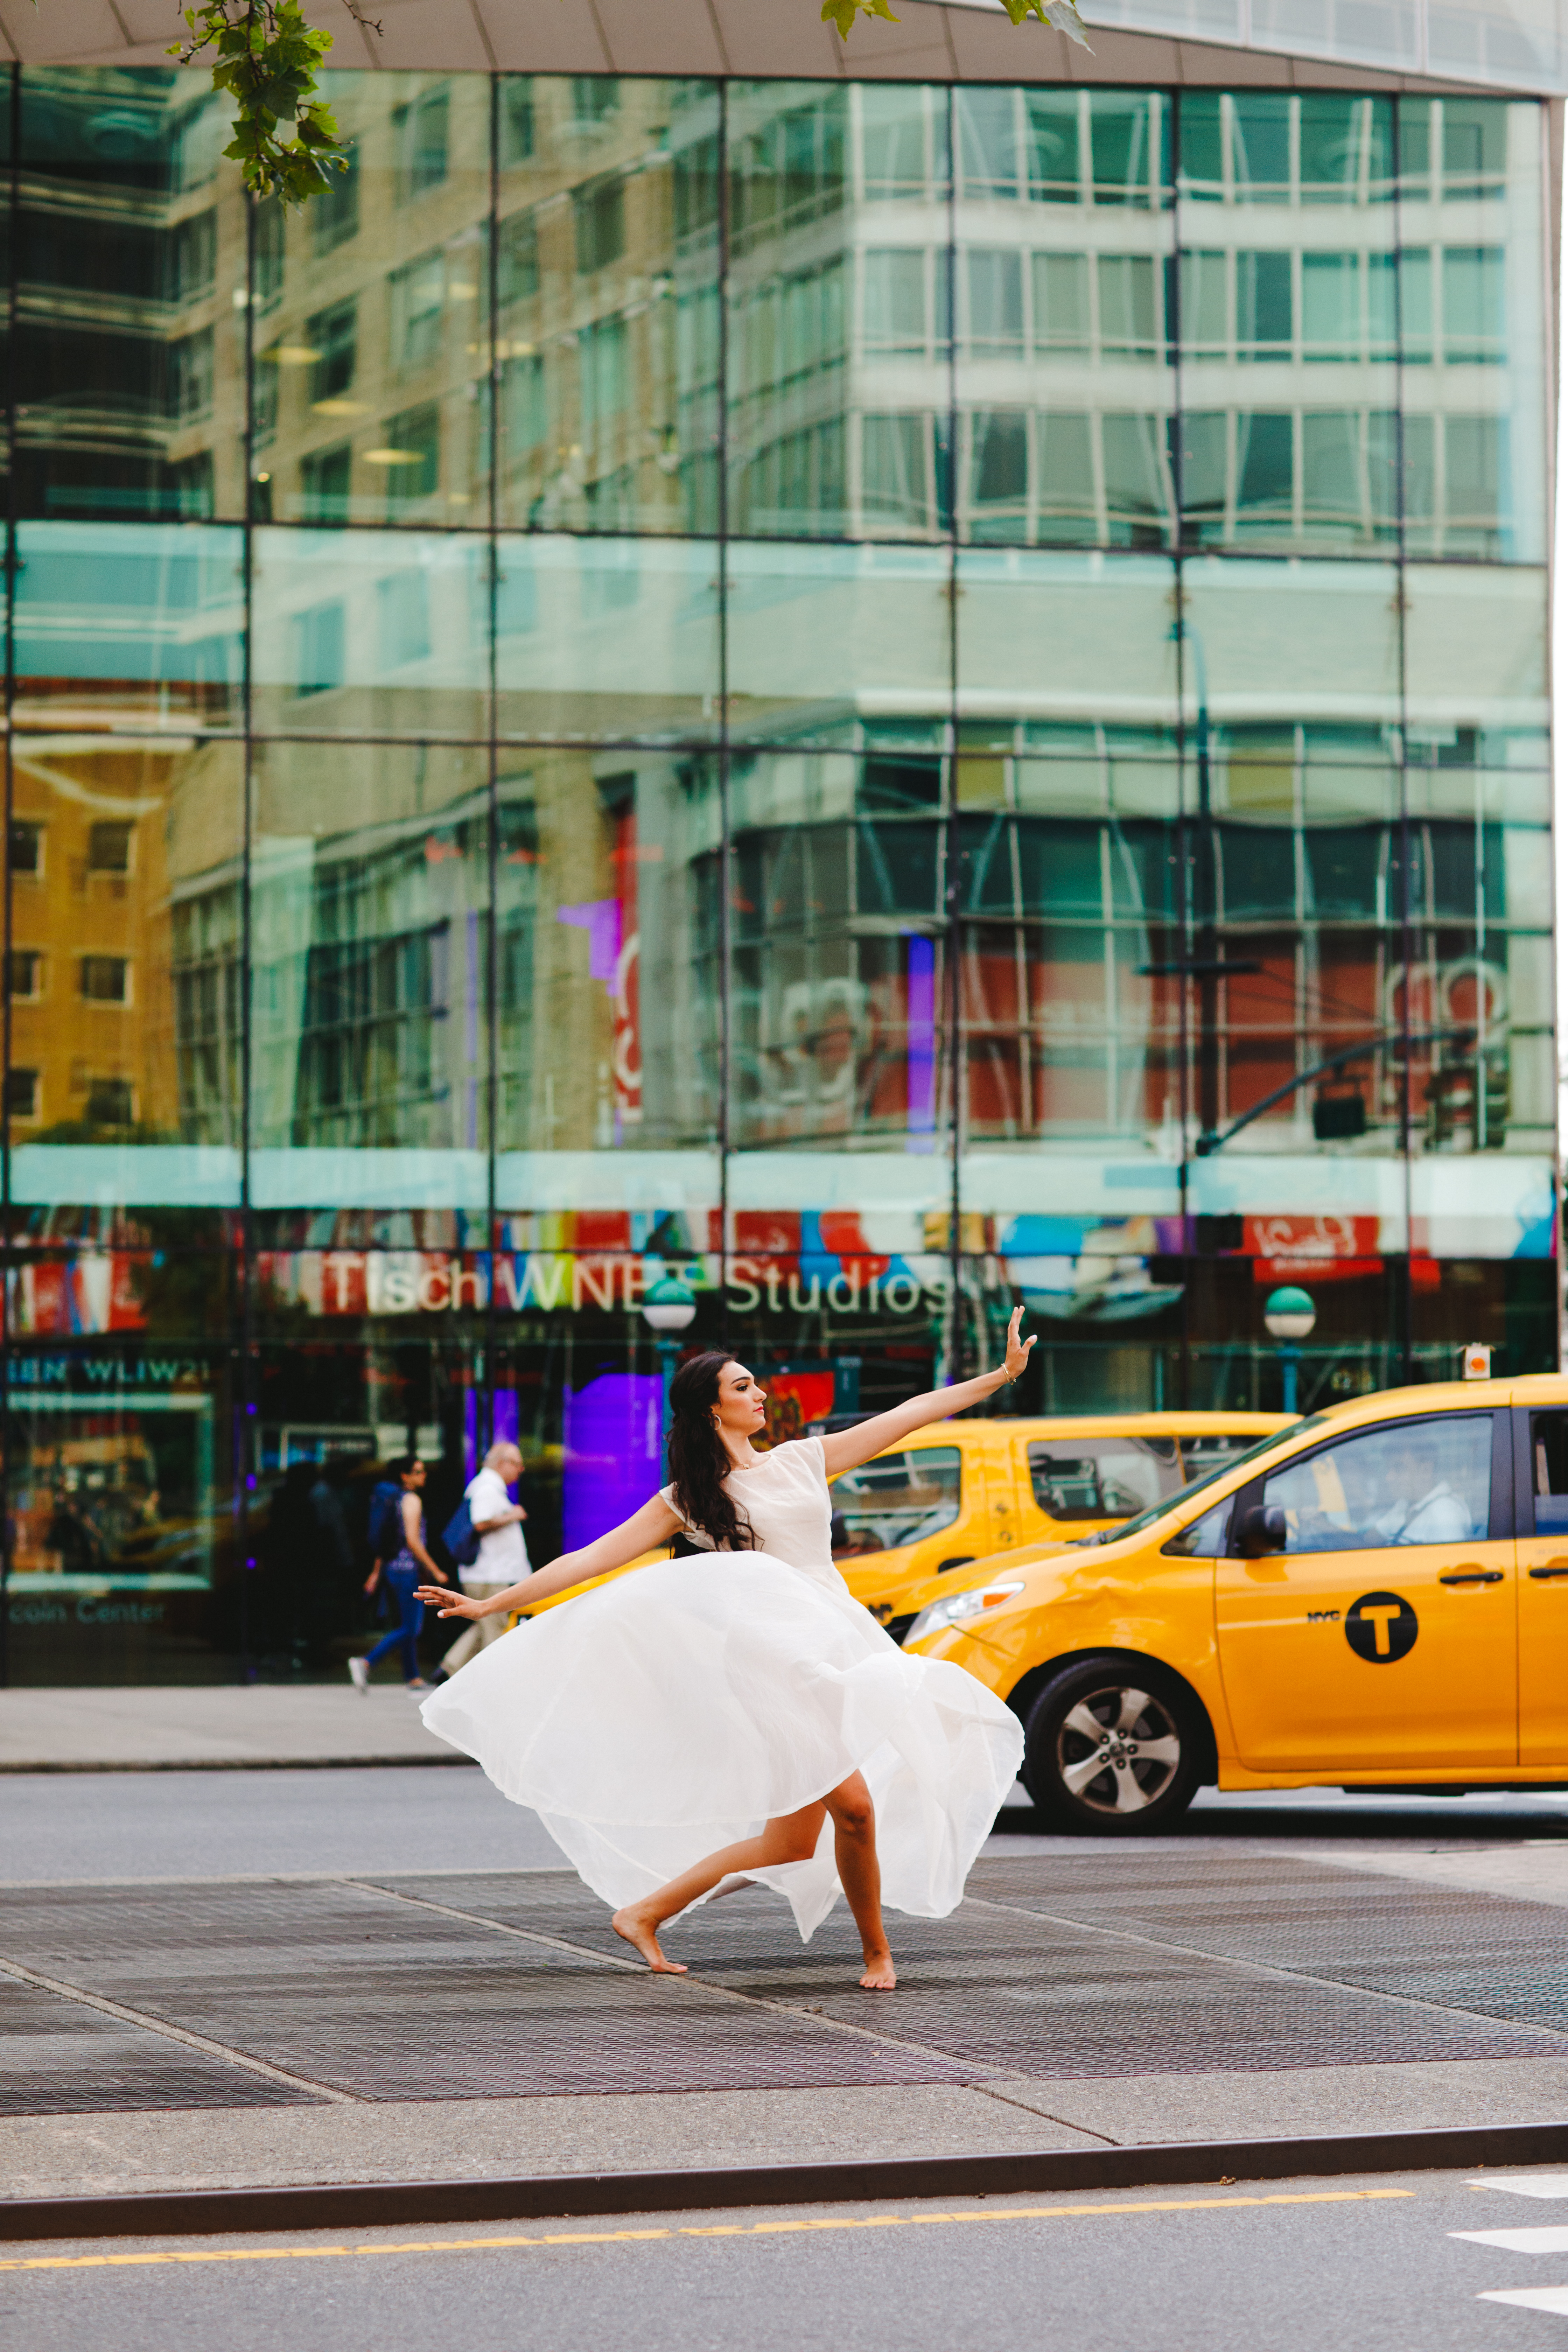 Brunette girl with long hair and red lipstick wearing a white dress and pink satin pointe shoes in a lunge on the streets of NYC in front of yellow taxis.